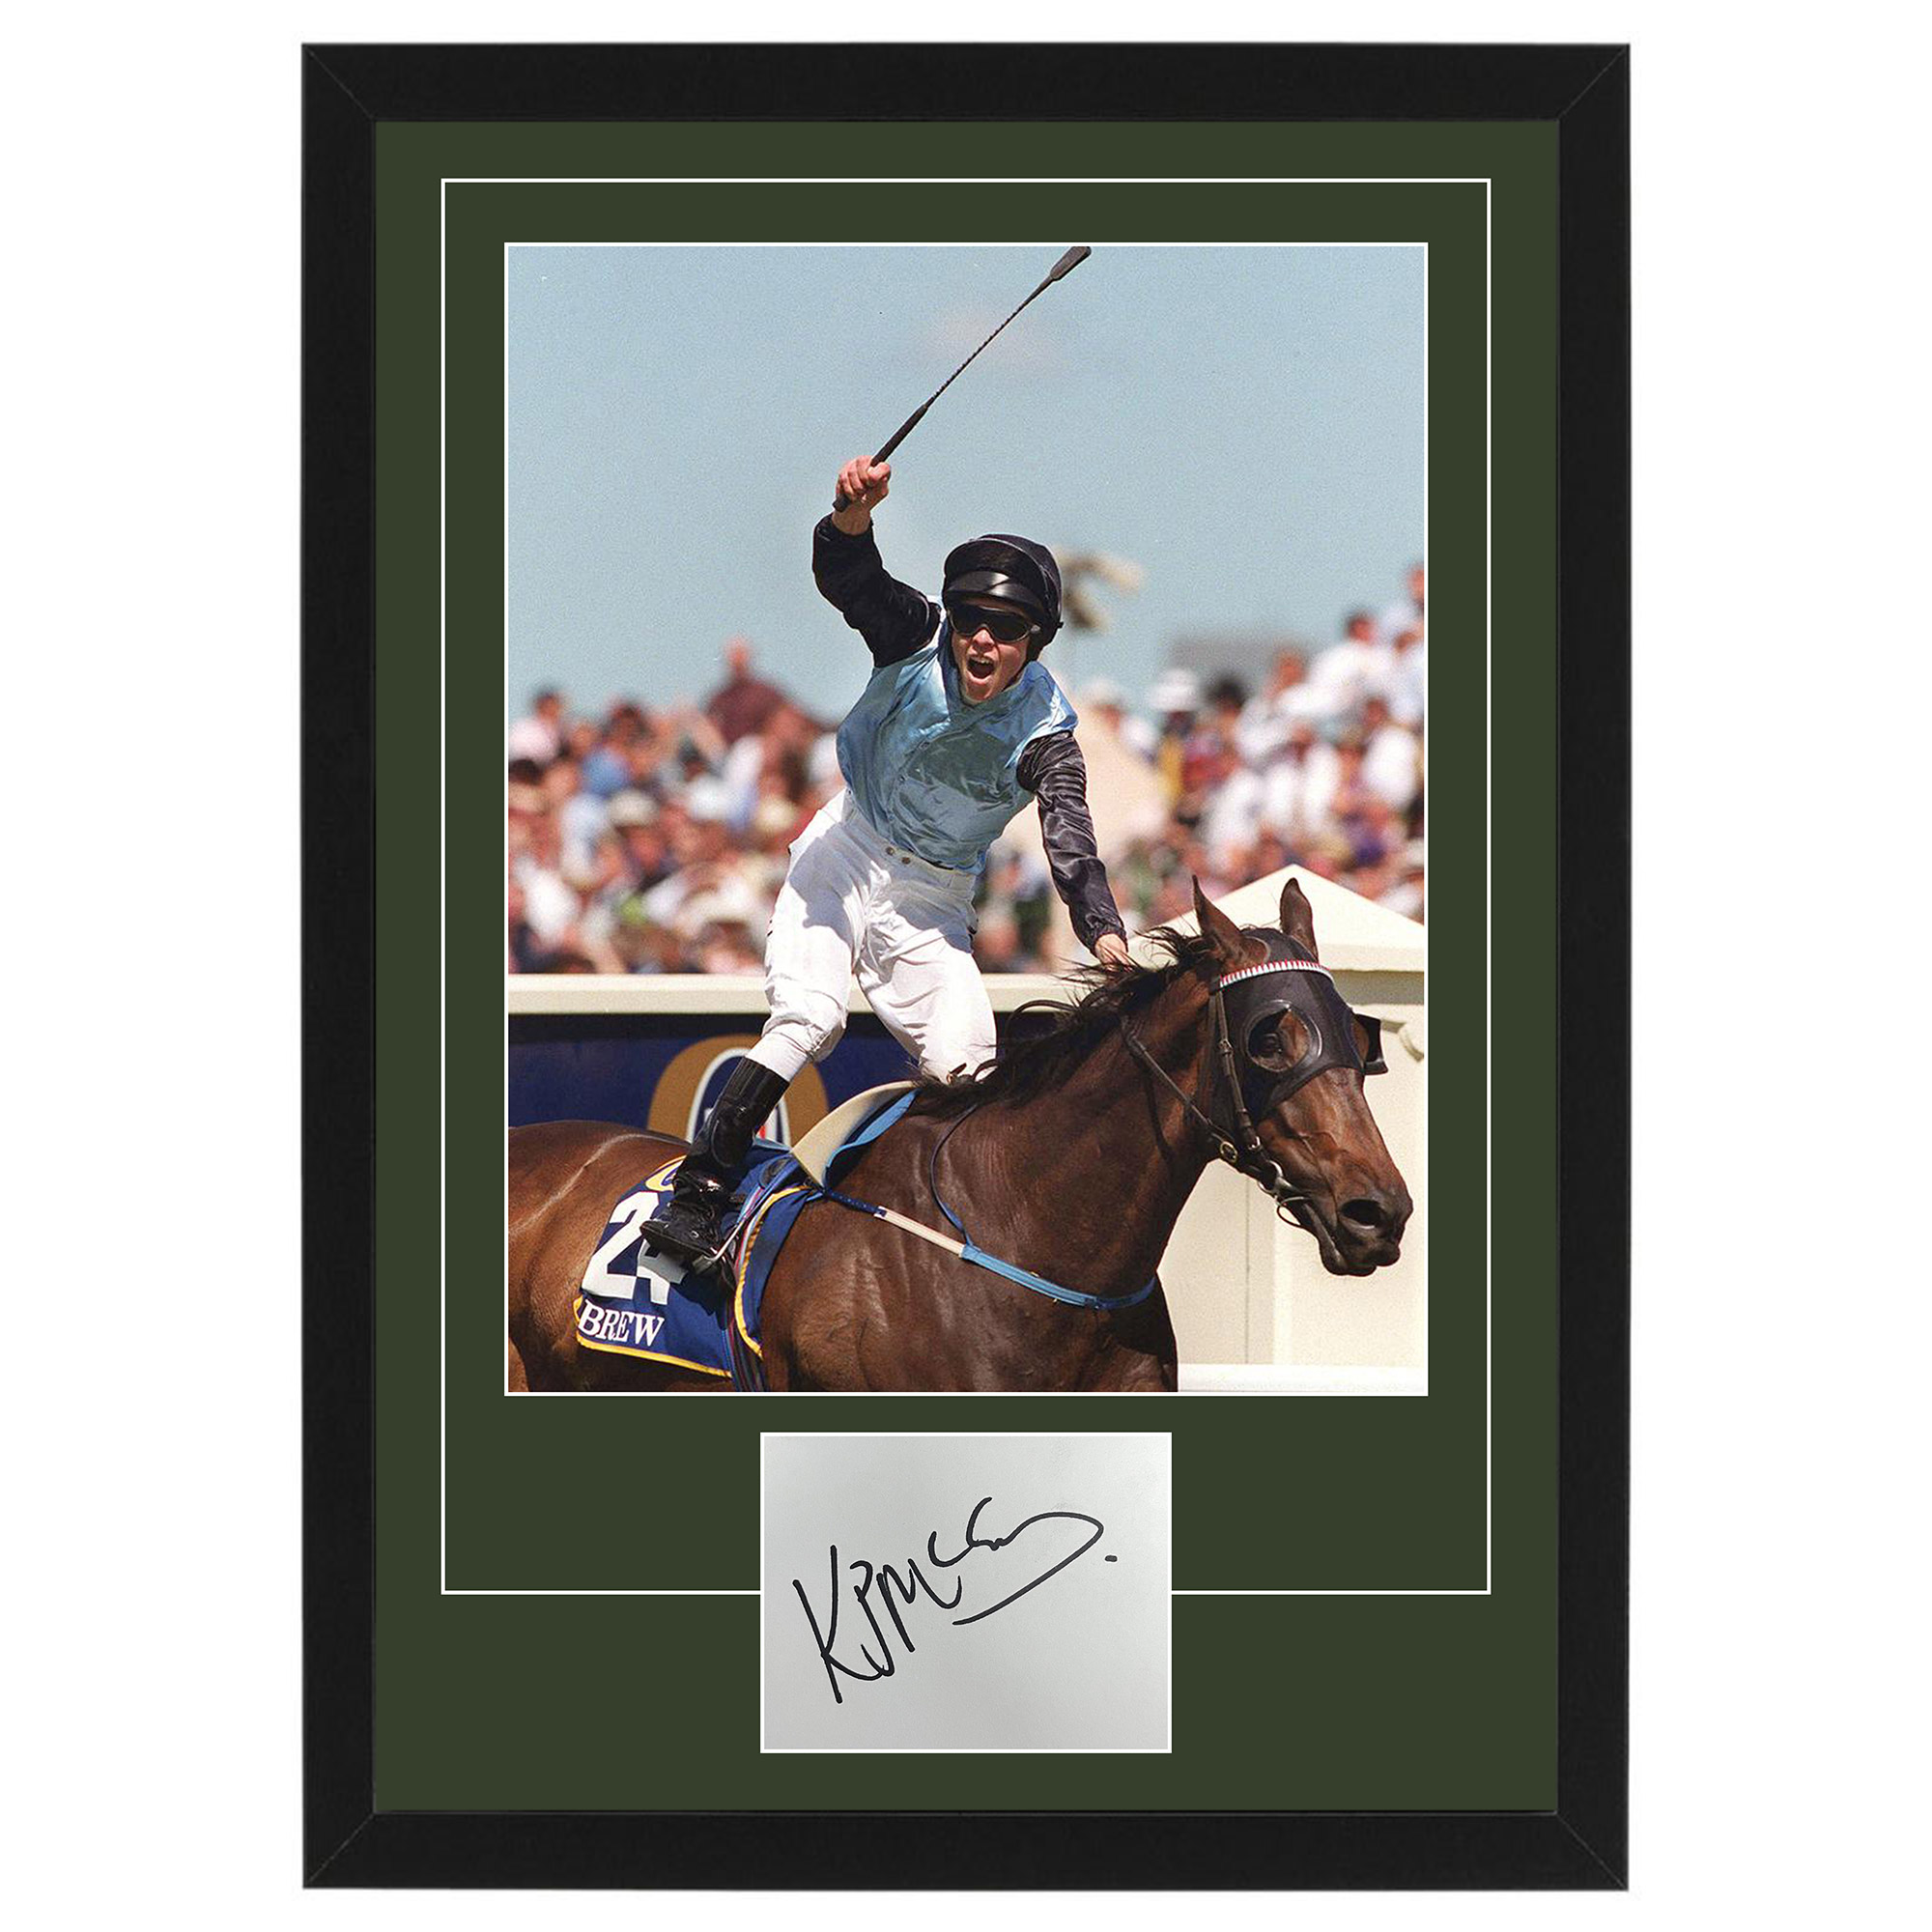 Horse Racing – KERRIN MCEVOY Signed & Framed Photo Collage